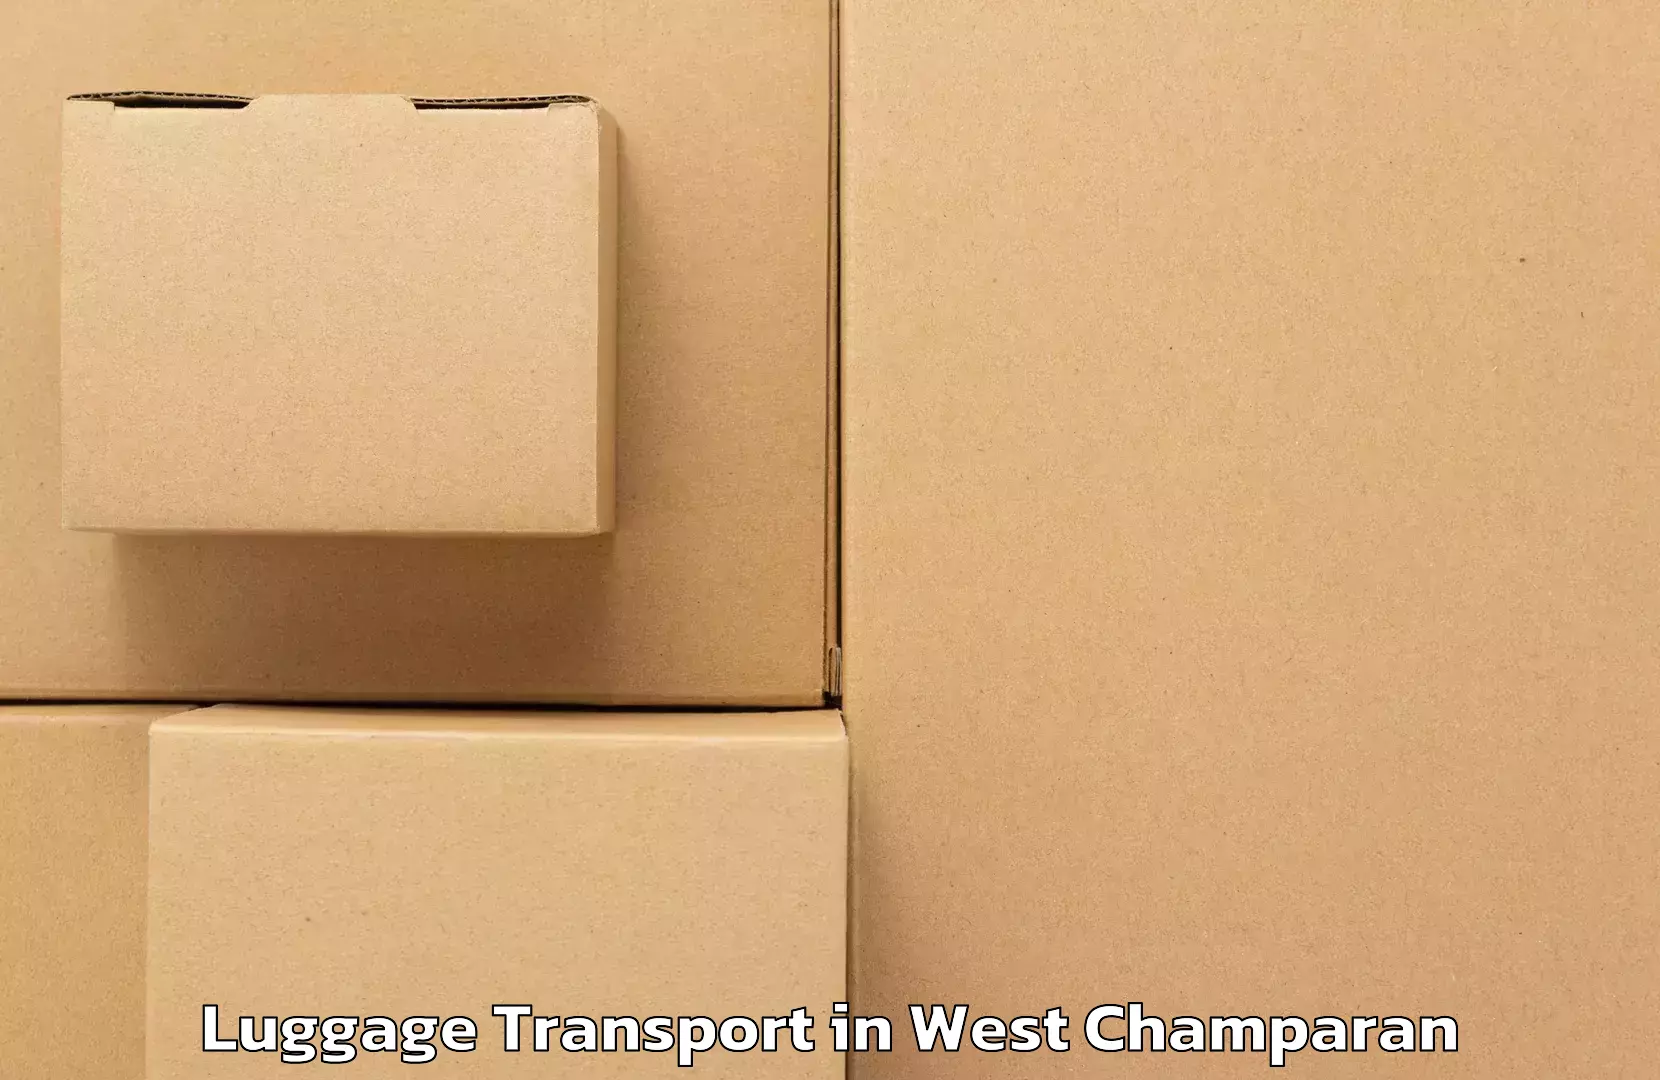 Same day luggage service in West Champaran